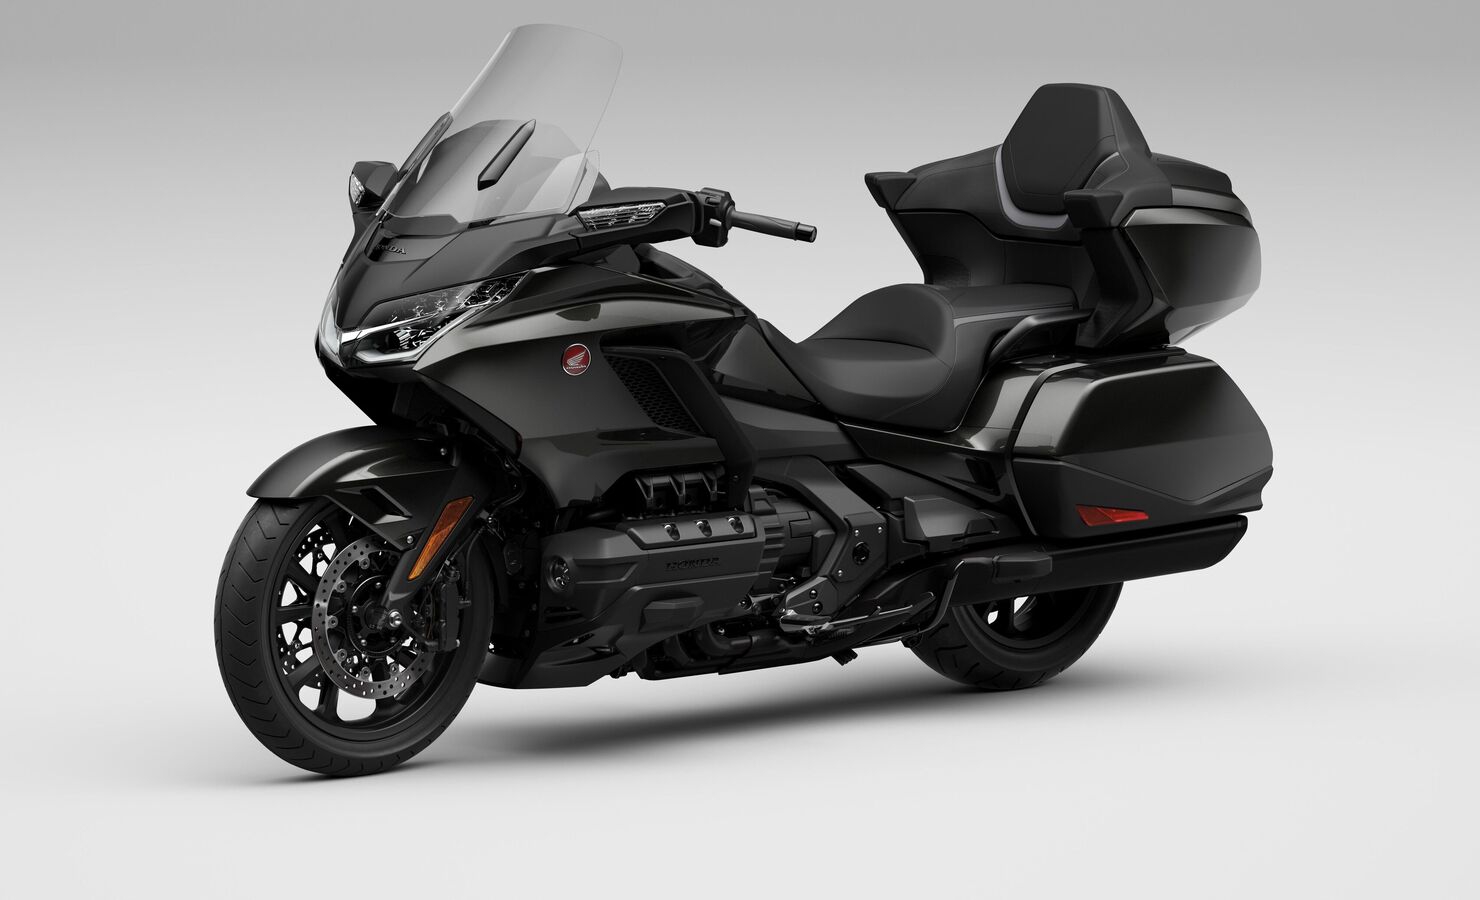 2022 Honda Gold Wing Tour launched at ₹39.20 lakh, gets airbags, DCT